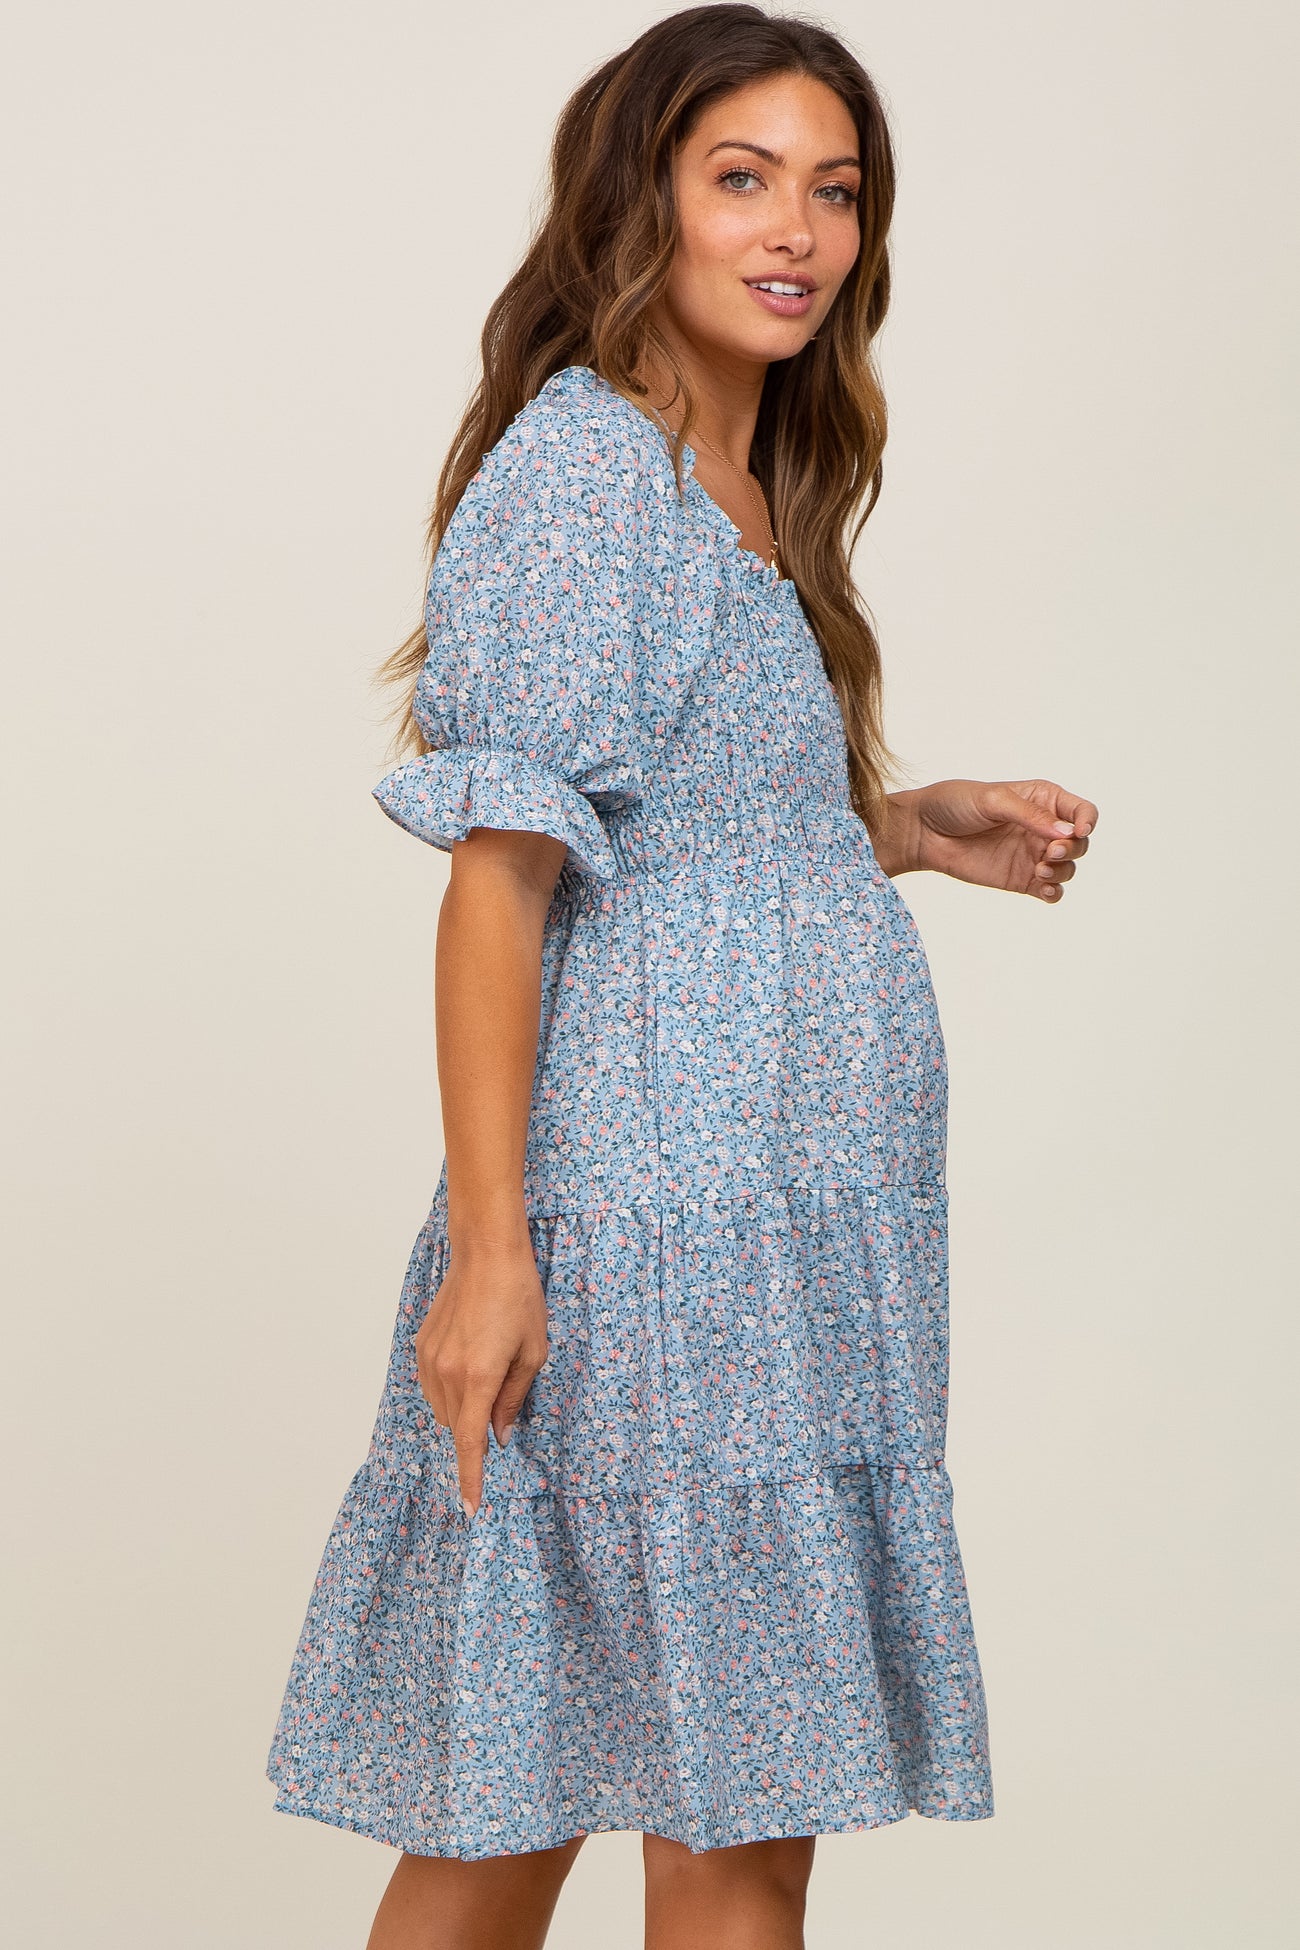 Blue Floral Smocked Tiered Maternity Dress– PinkBlush